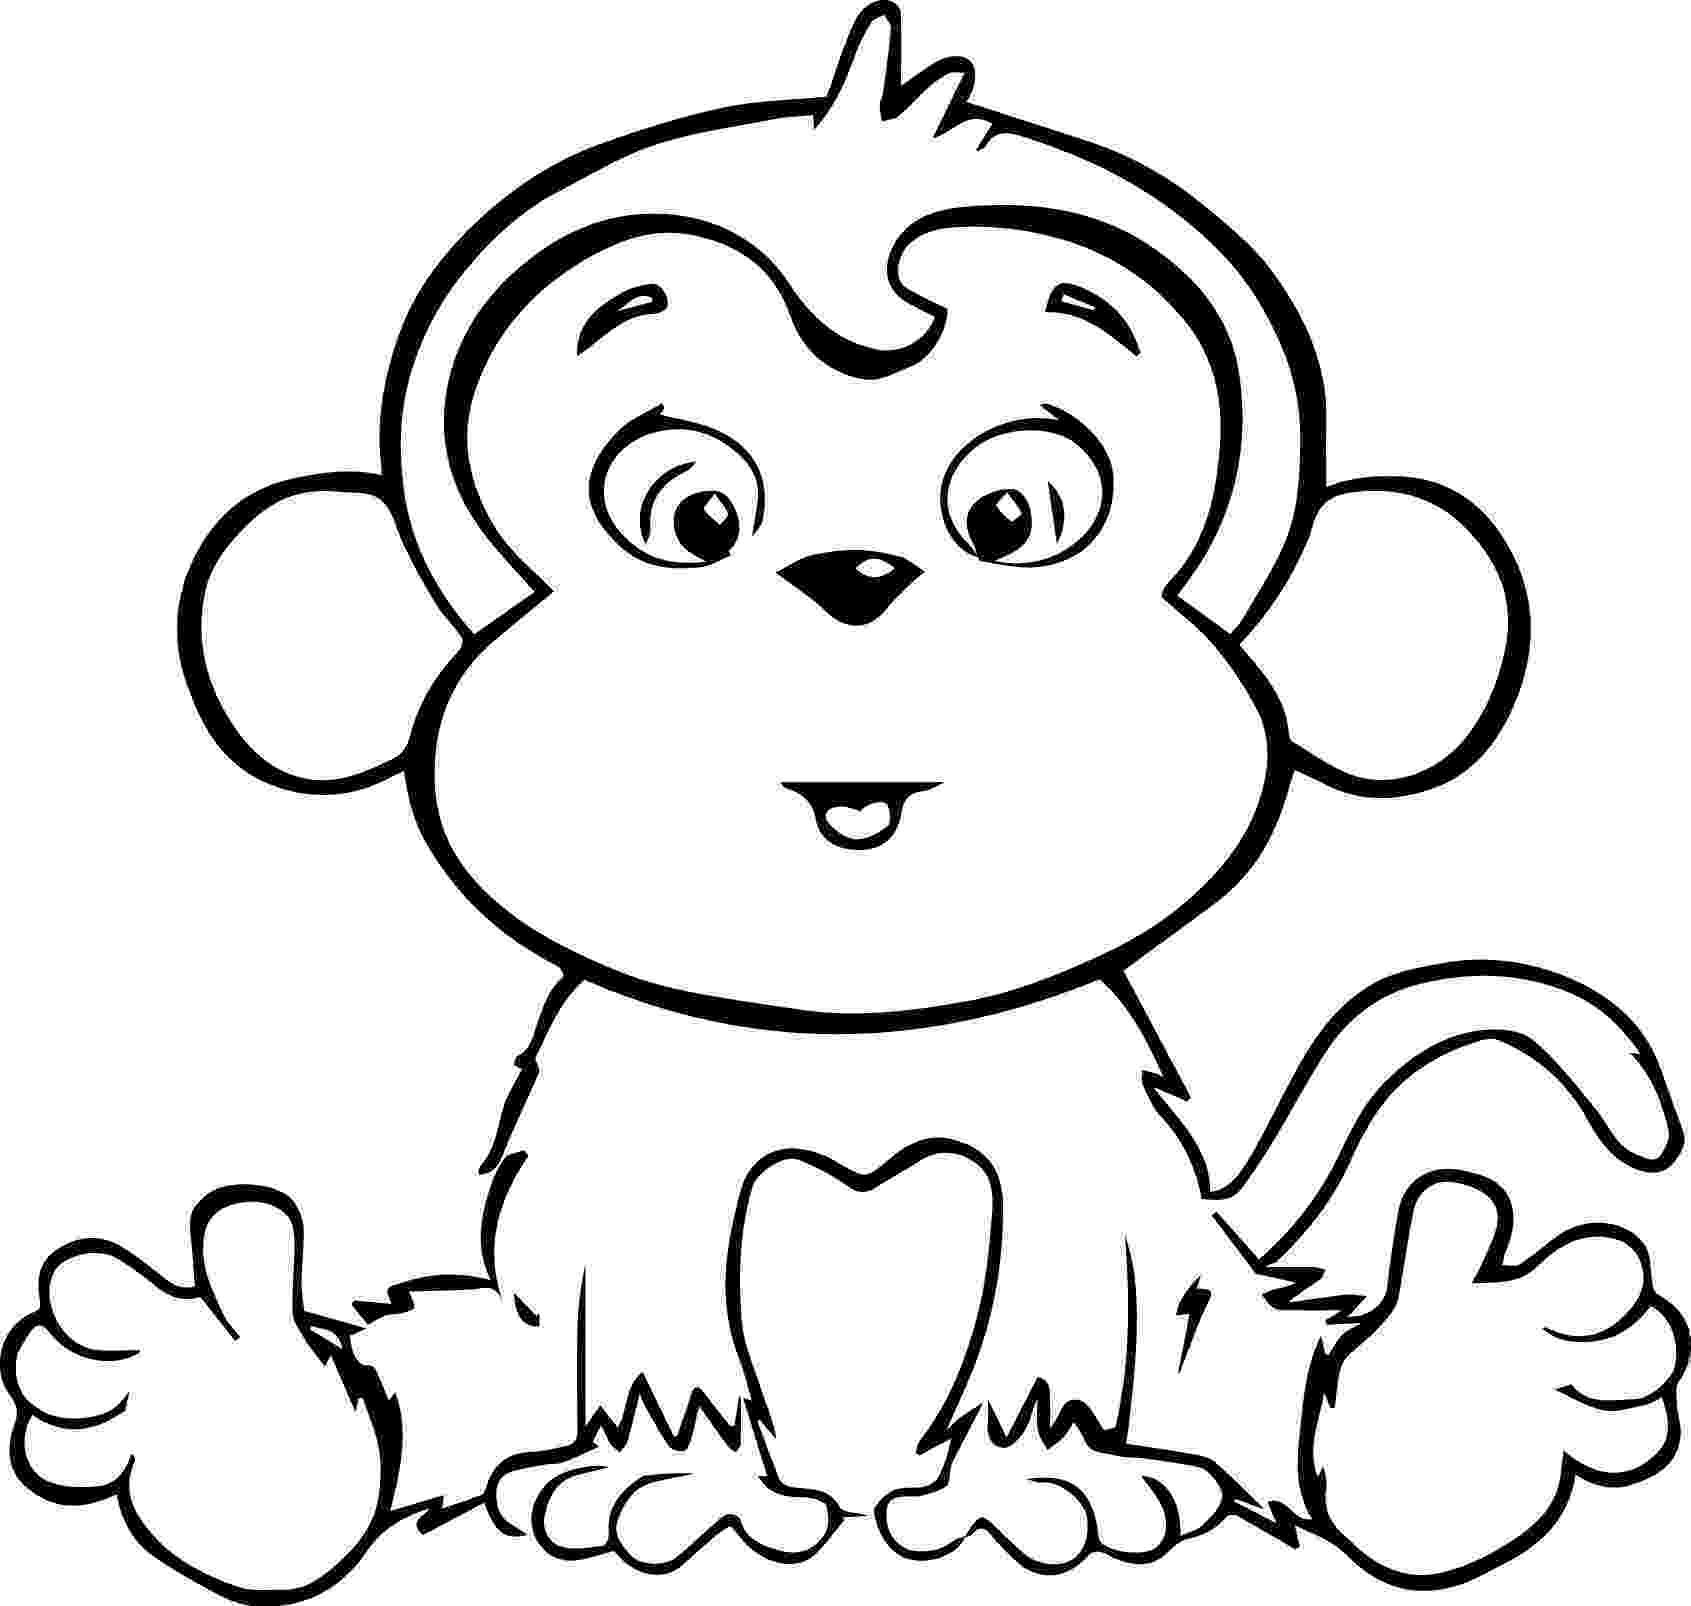 monkey coloring images monkey coloring pages getcoloringpagescom monkey images coloring 